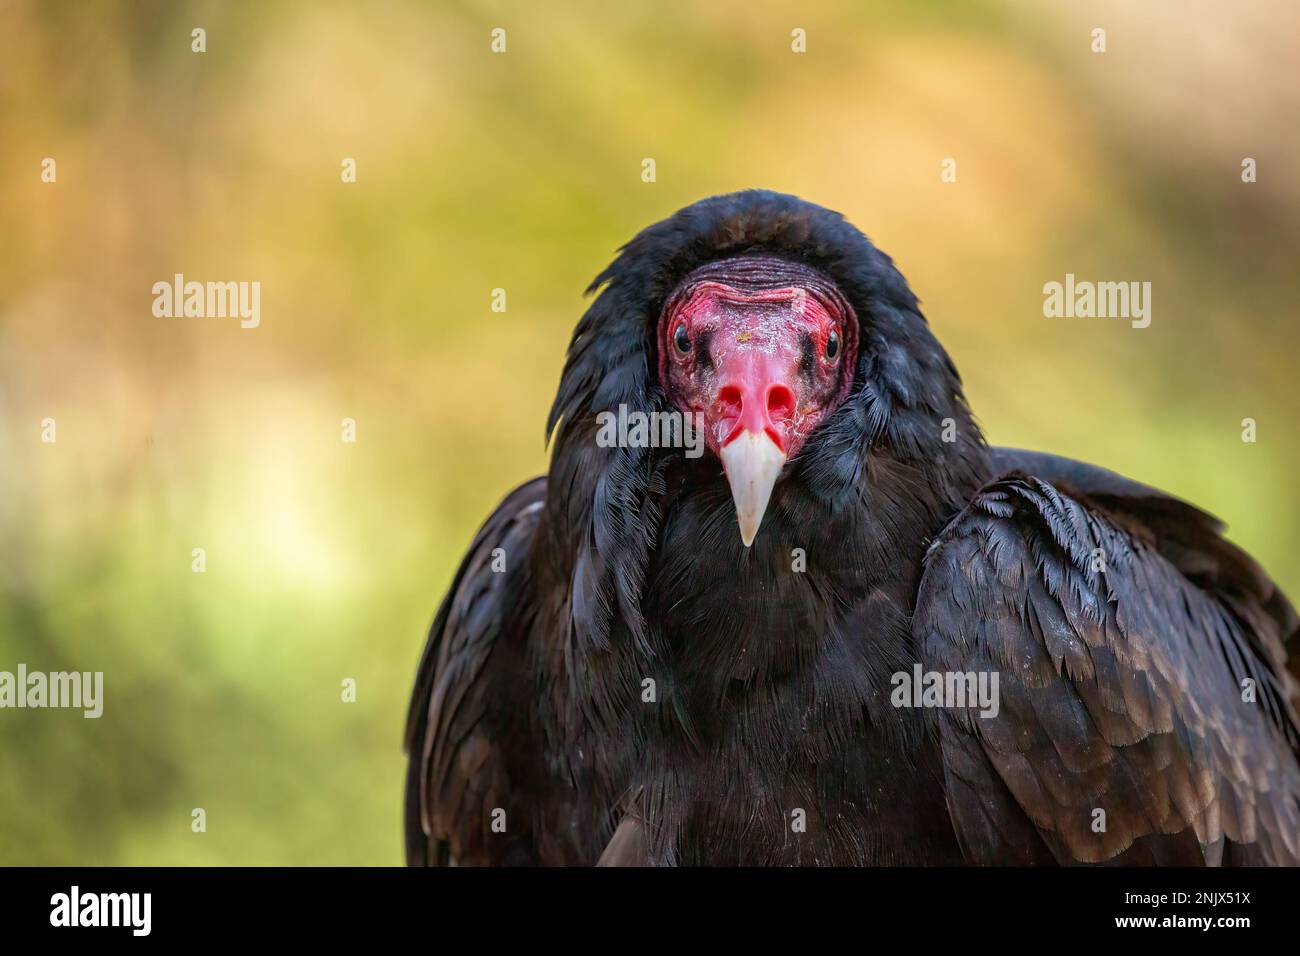 Turkey Vulture (Cathartes aura) with blurred background. Stock Photo